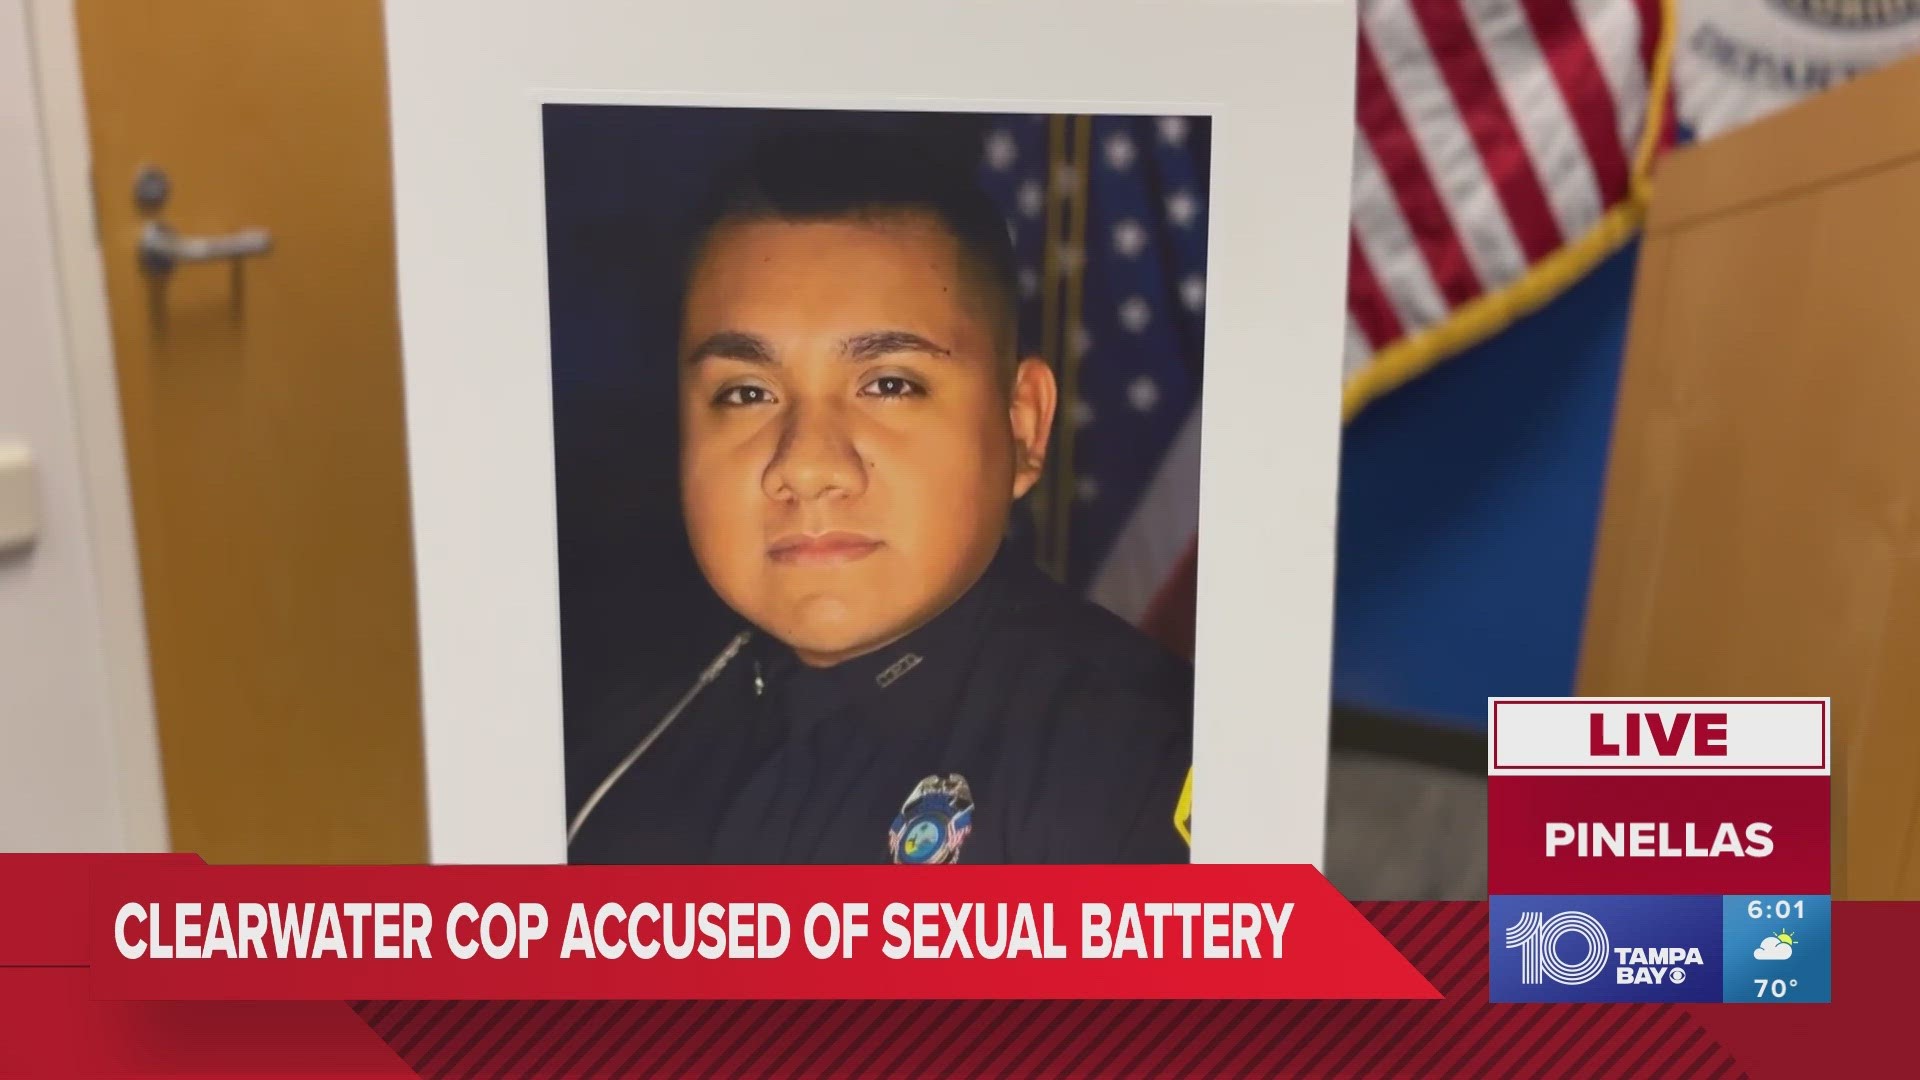 Officer Nicolas Paloma told the woman she could take care of her charges by "doing things for him," Police Chief Eric Gandy said.